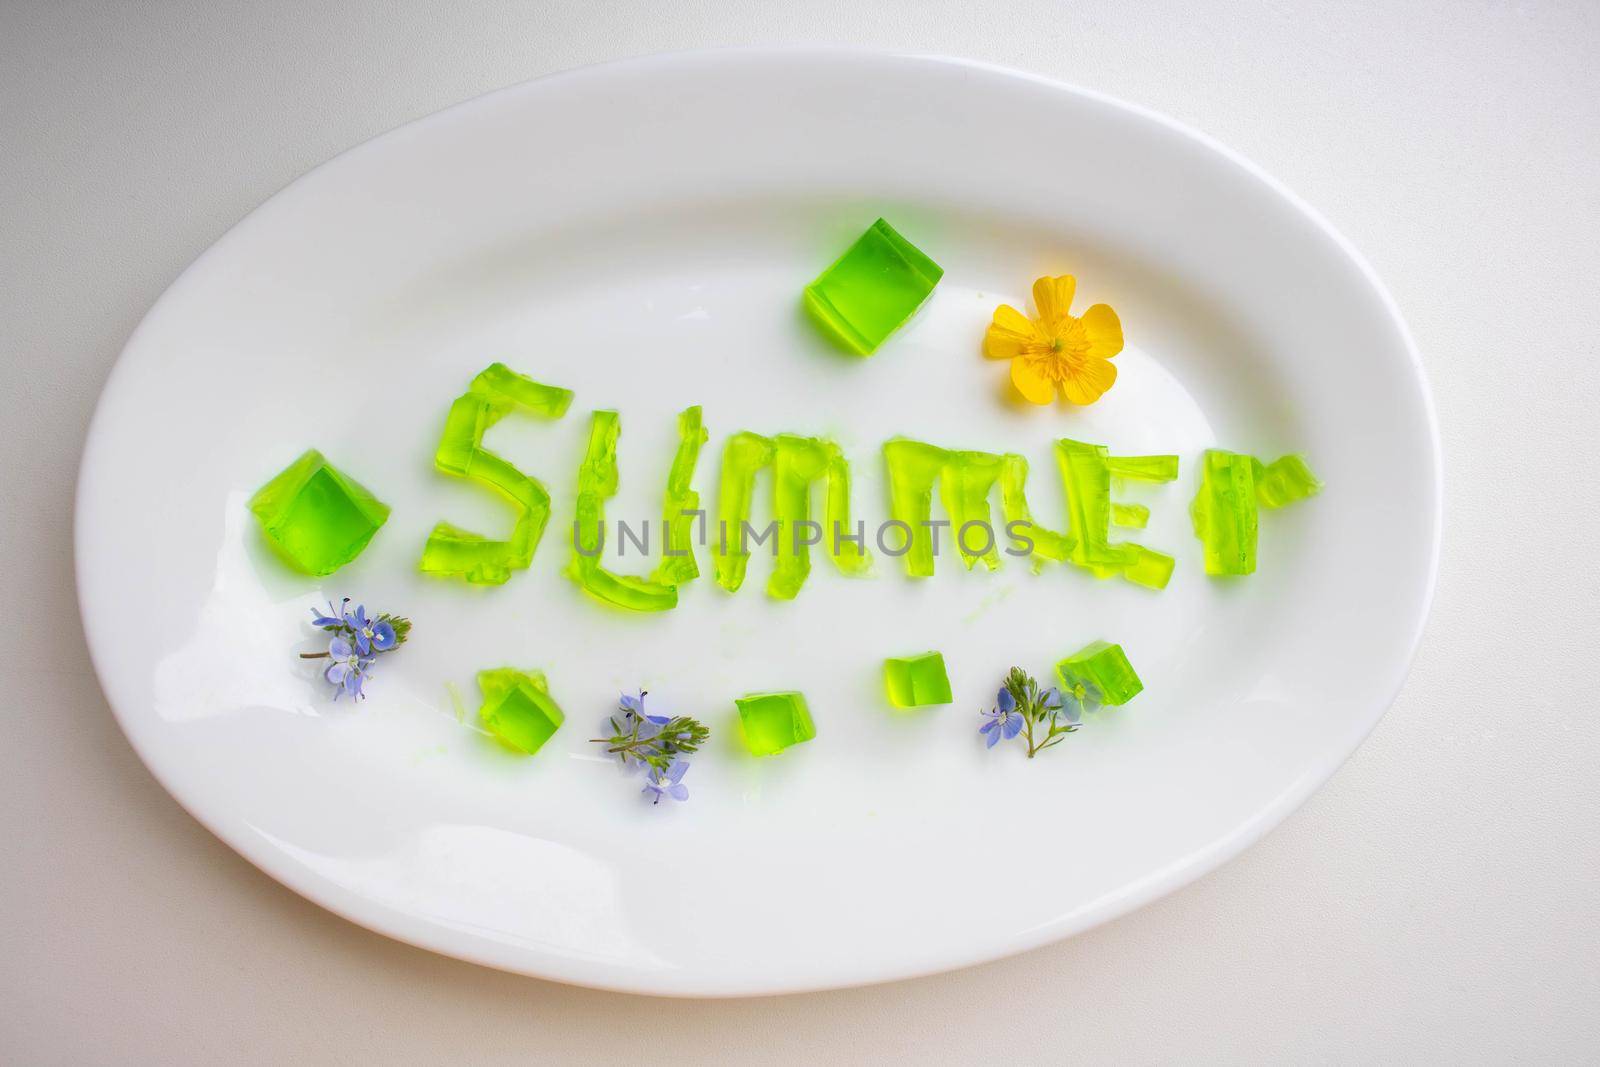 The word summer is made of green jelly cubes on a white plate by lapushka62